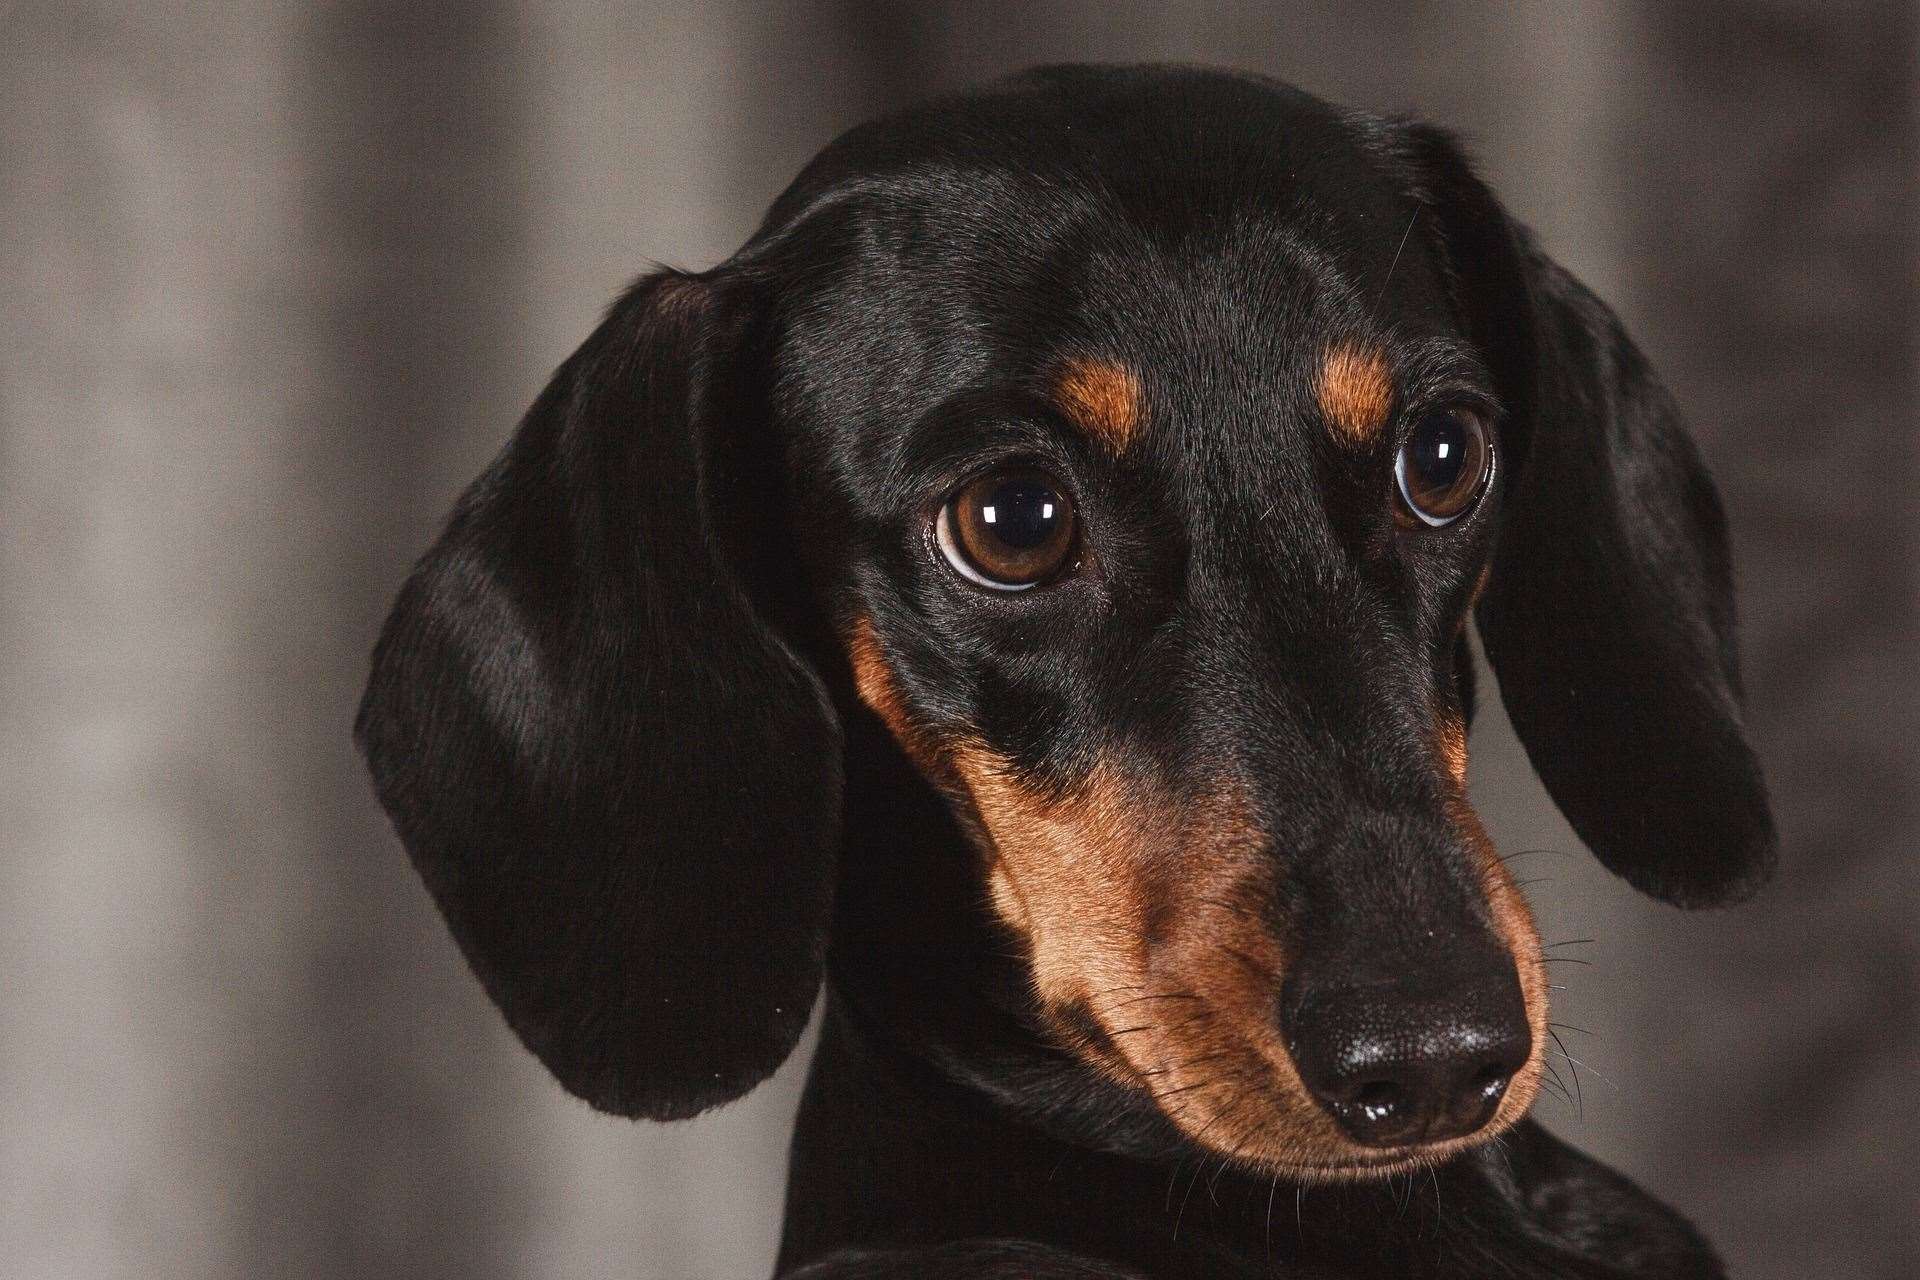 The dachshund is eighth on the list, with 1,476,000 searches.  Image: Pixabay